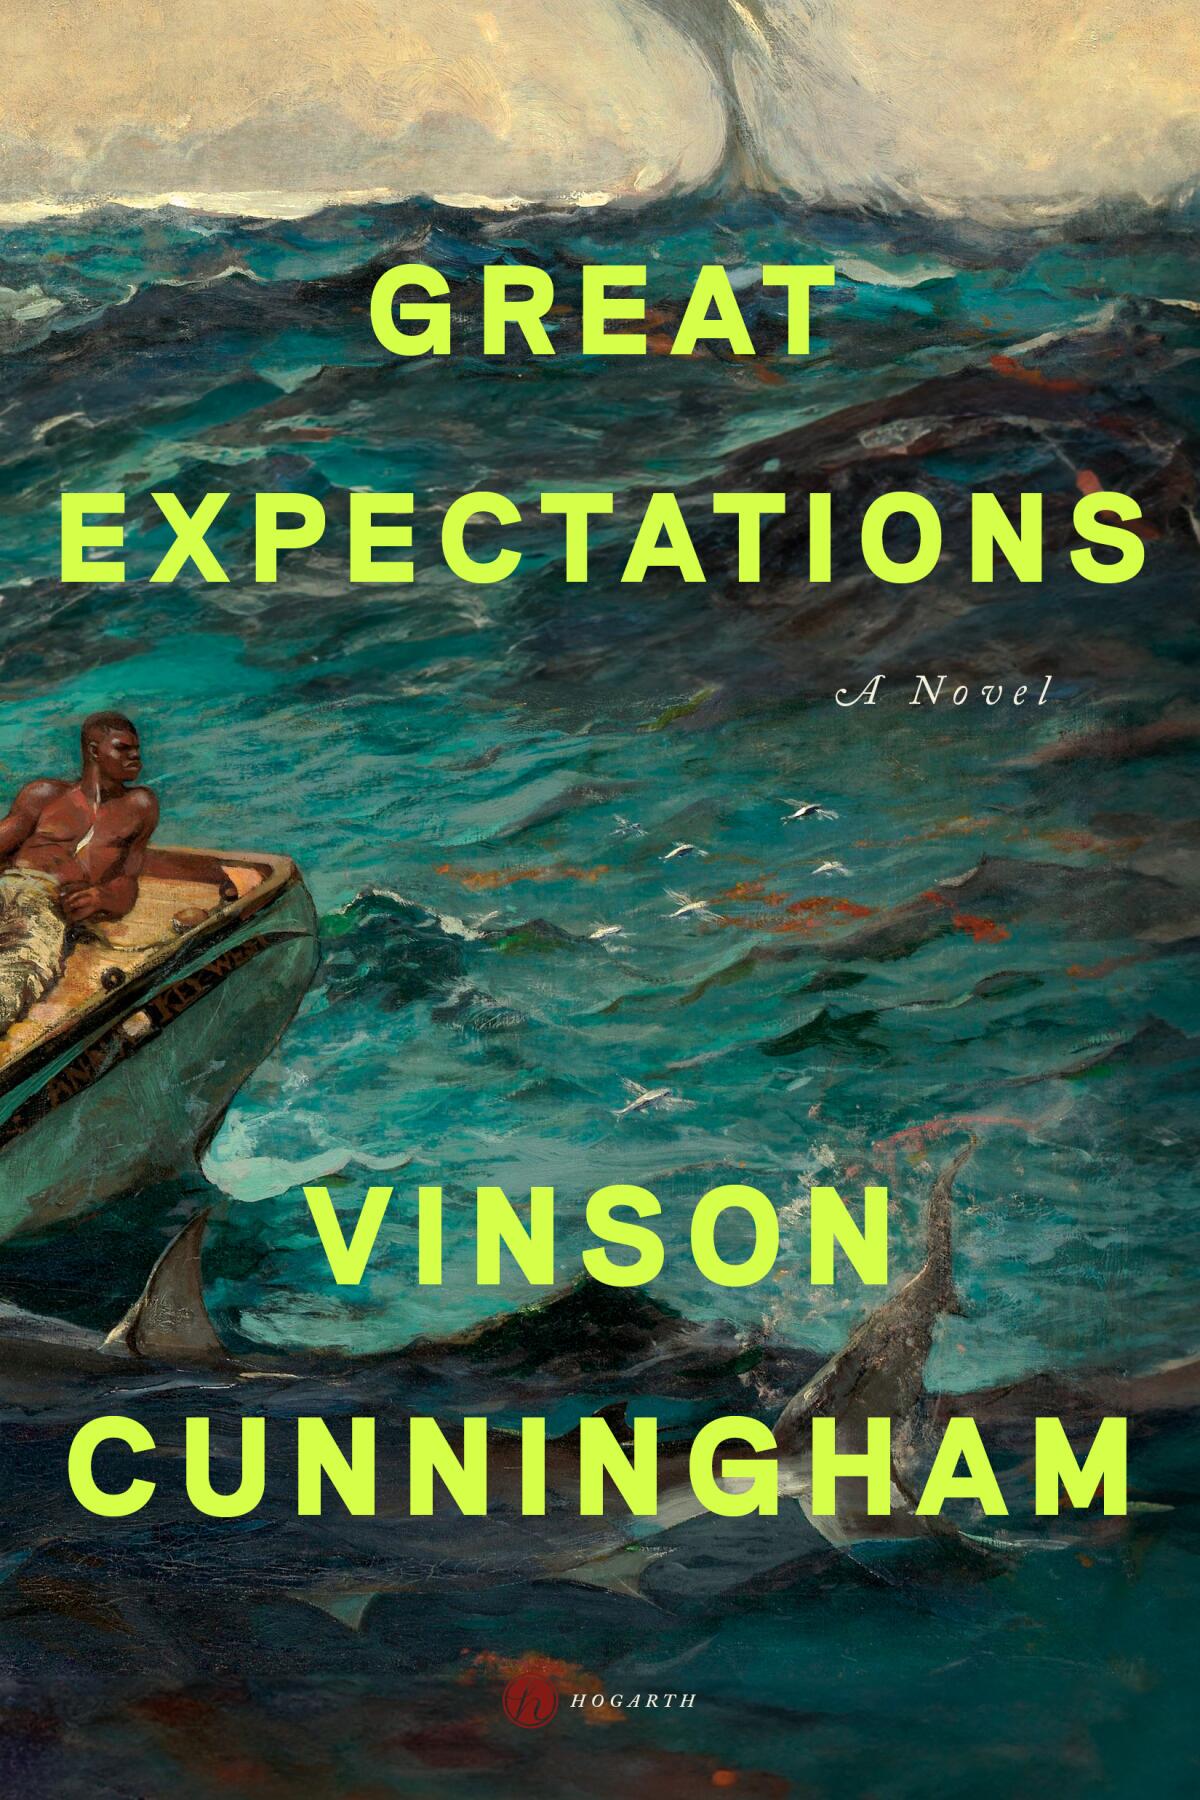 "Great Expectations" by Vinson Cunningham book jacket